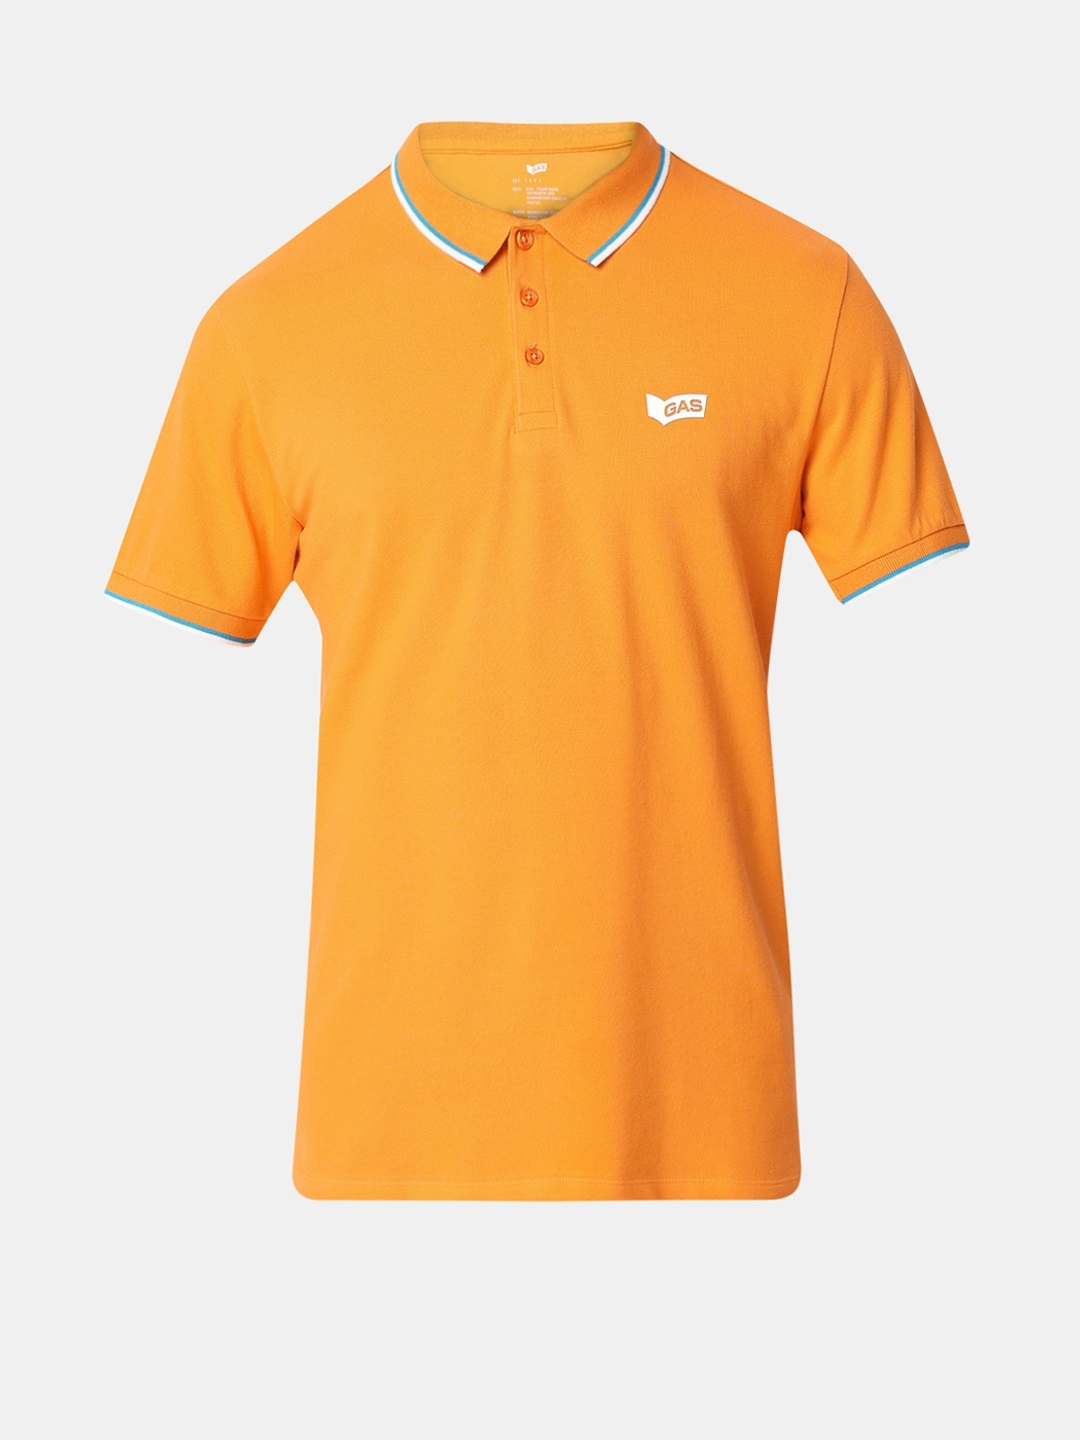 Regular Fit Half Sleeve Solid Polo T-Shirt